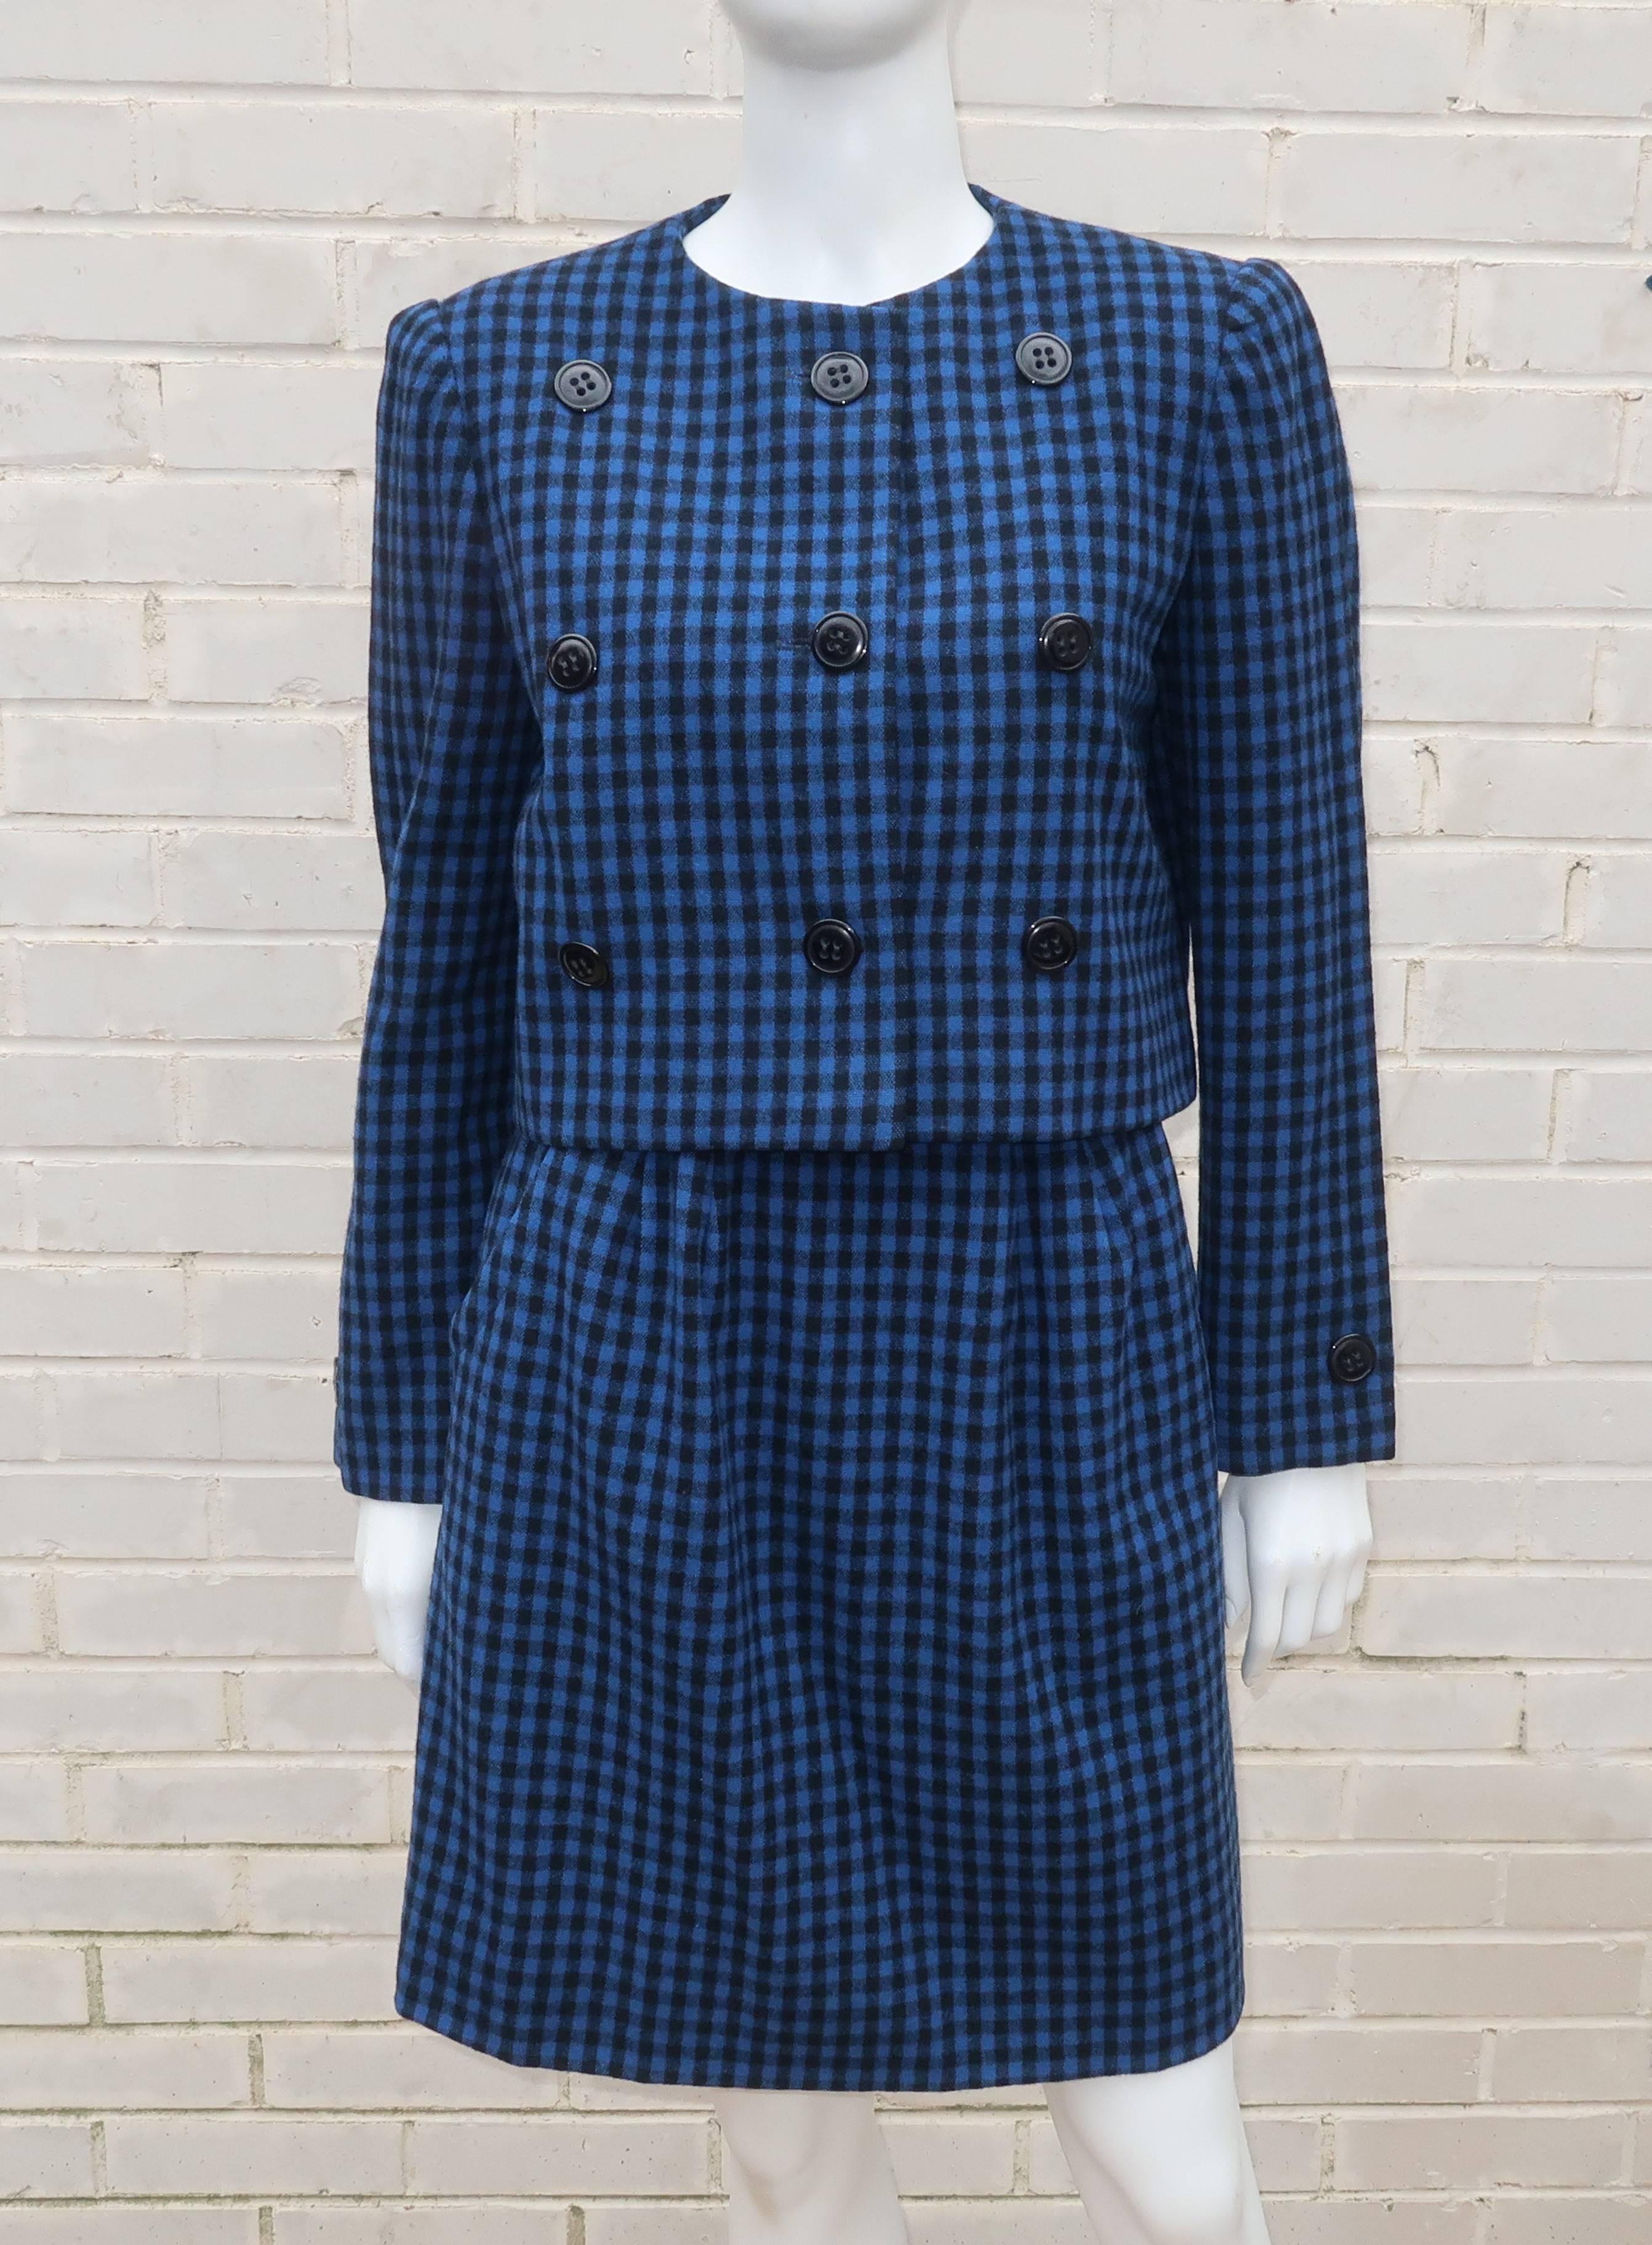 Delightfully demure with a good dose of style and sophistication ... all hallmarks of this C.1970 Mollie Parnis two piece suit.  Both the jacket and skirt are fabricated with a brilliant blue and black gingham wool fabric.  The boxy cropped jacket